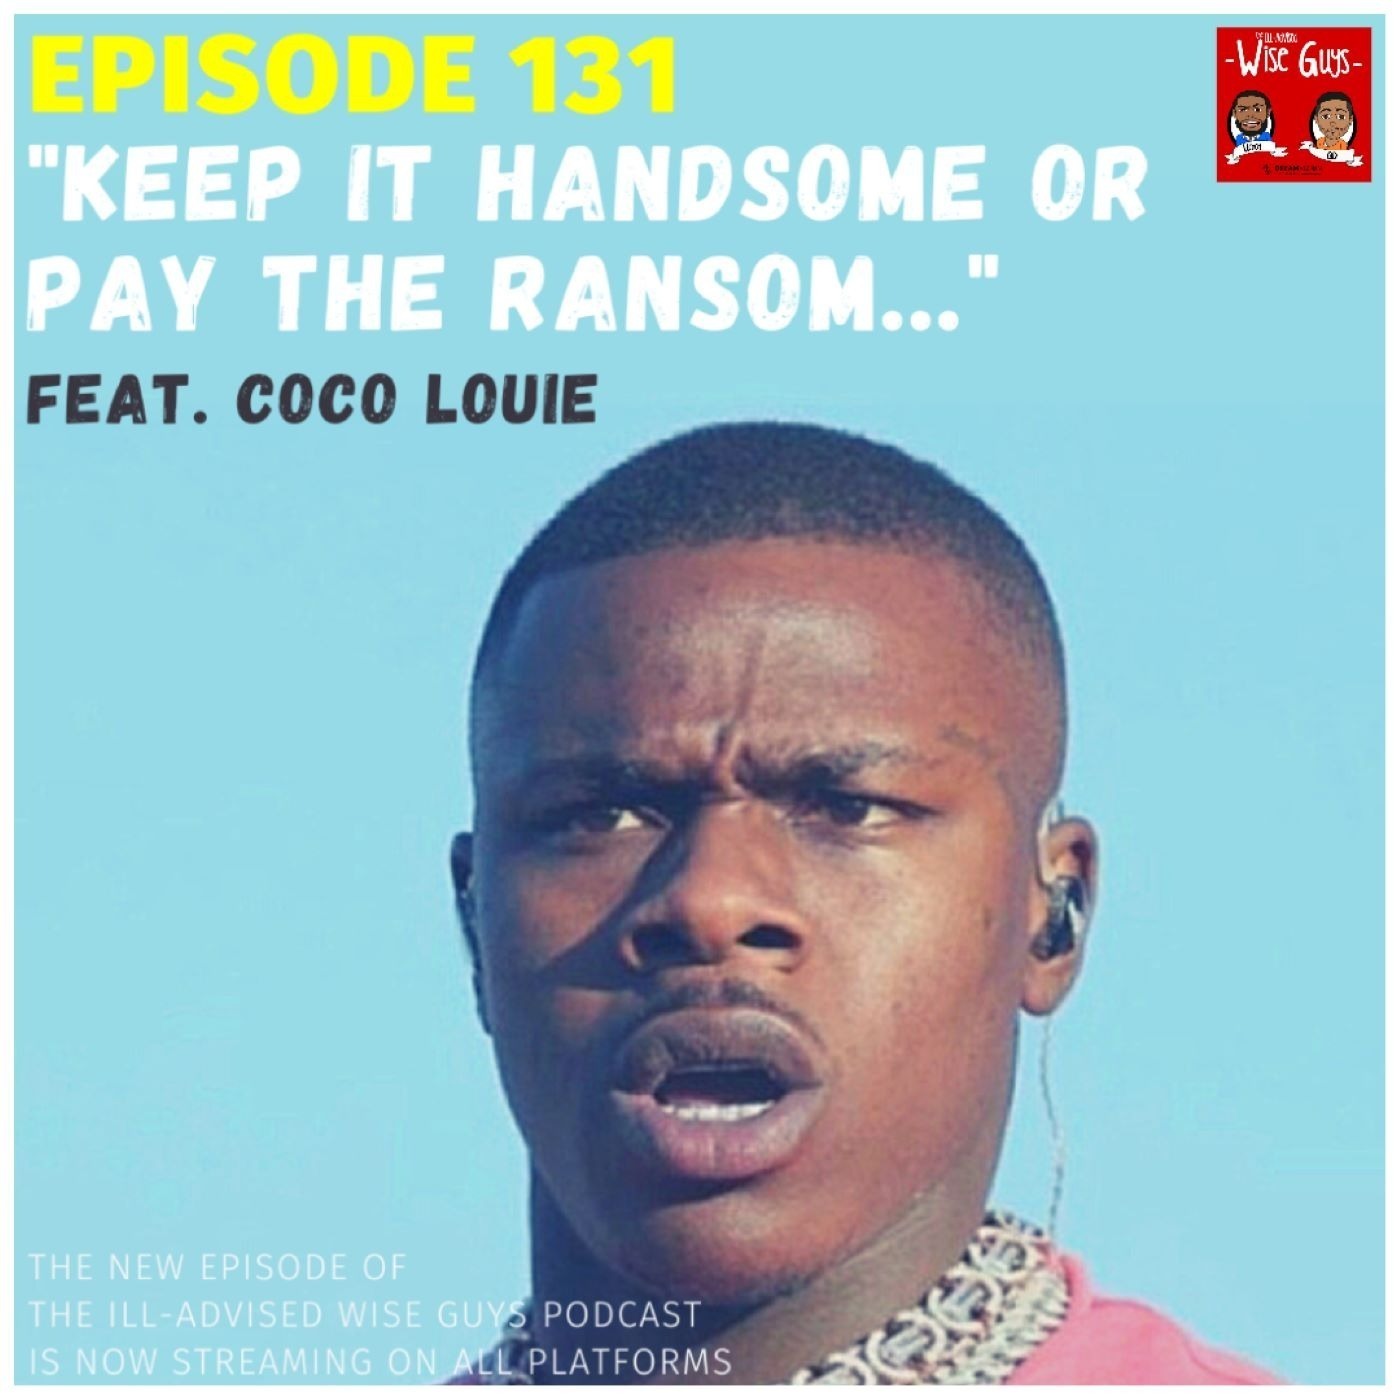 Episode 131 - "Keep It Handsome Or Pay The Ransom..." (Feat. Coco Louie)